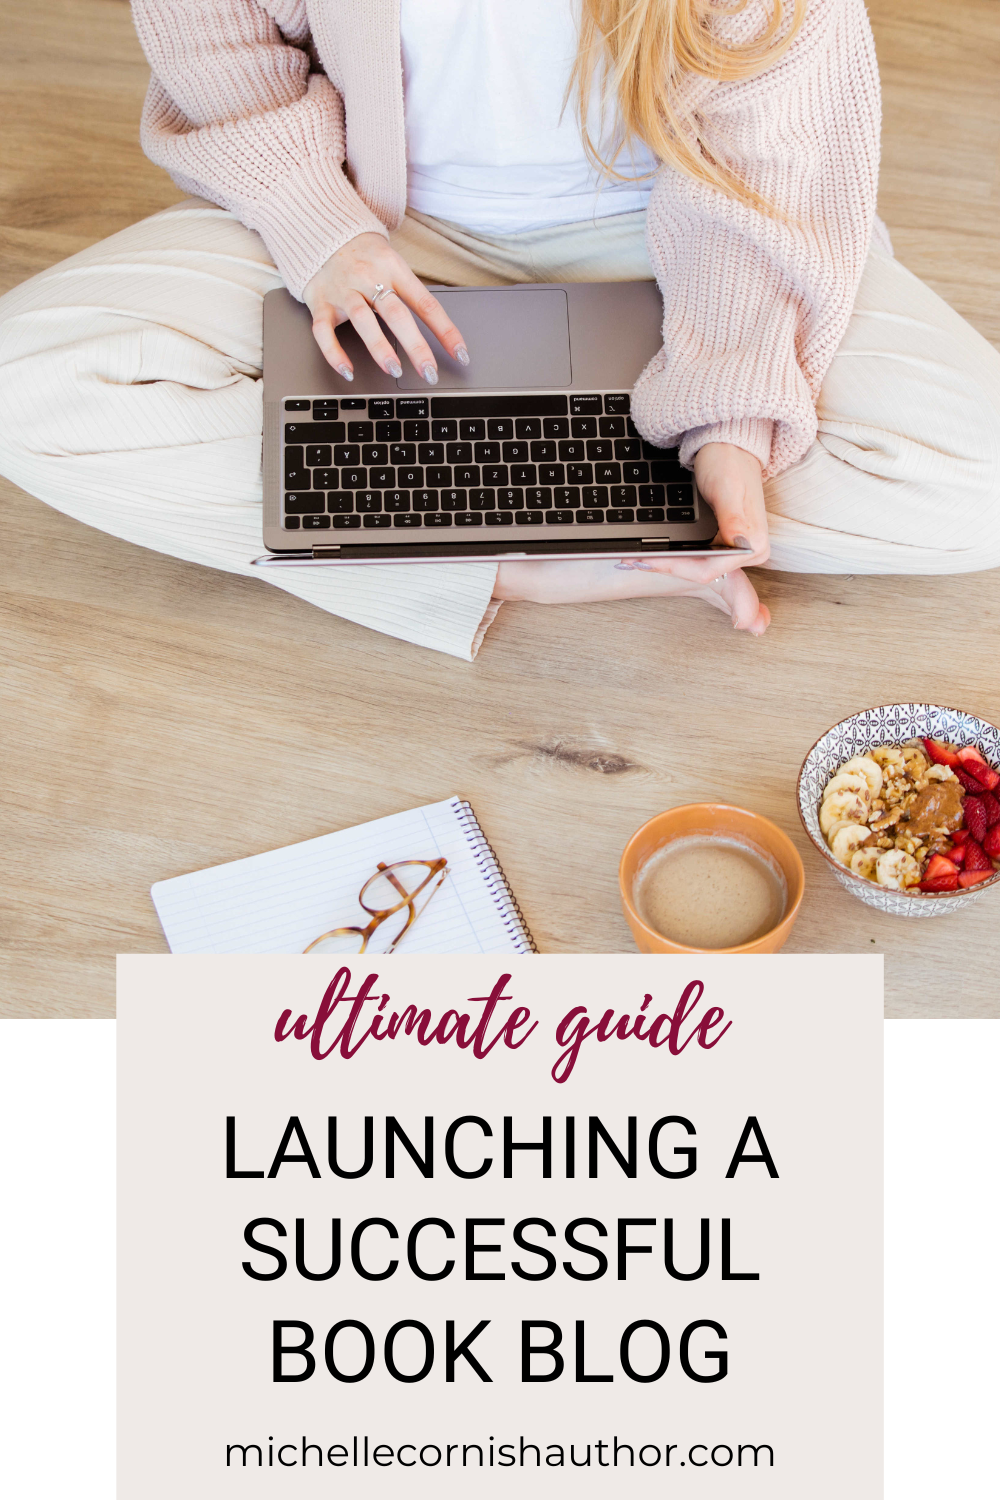 The Ultimate Guide to Launching a Successful Book Blog